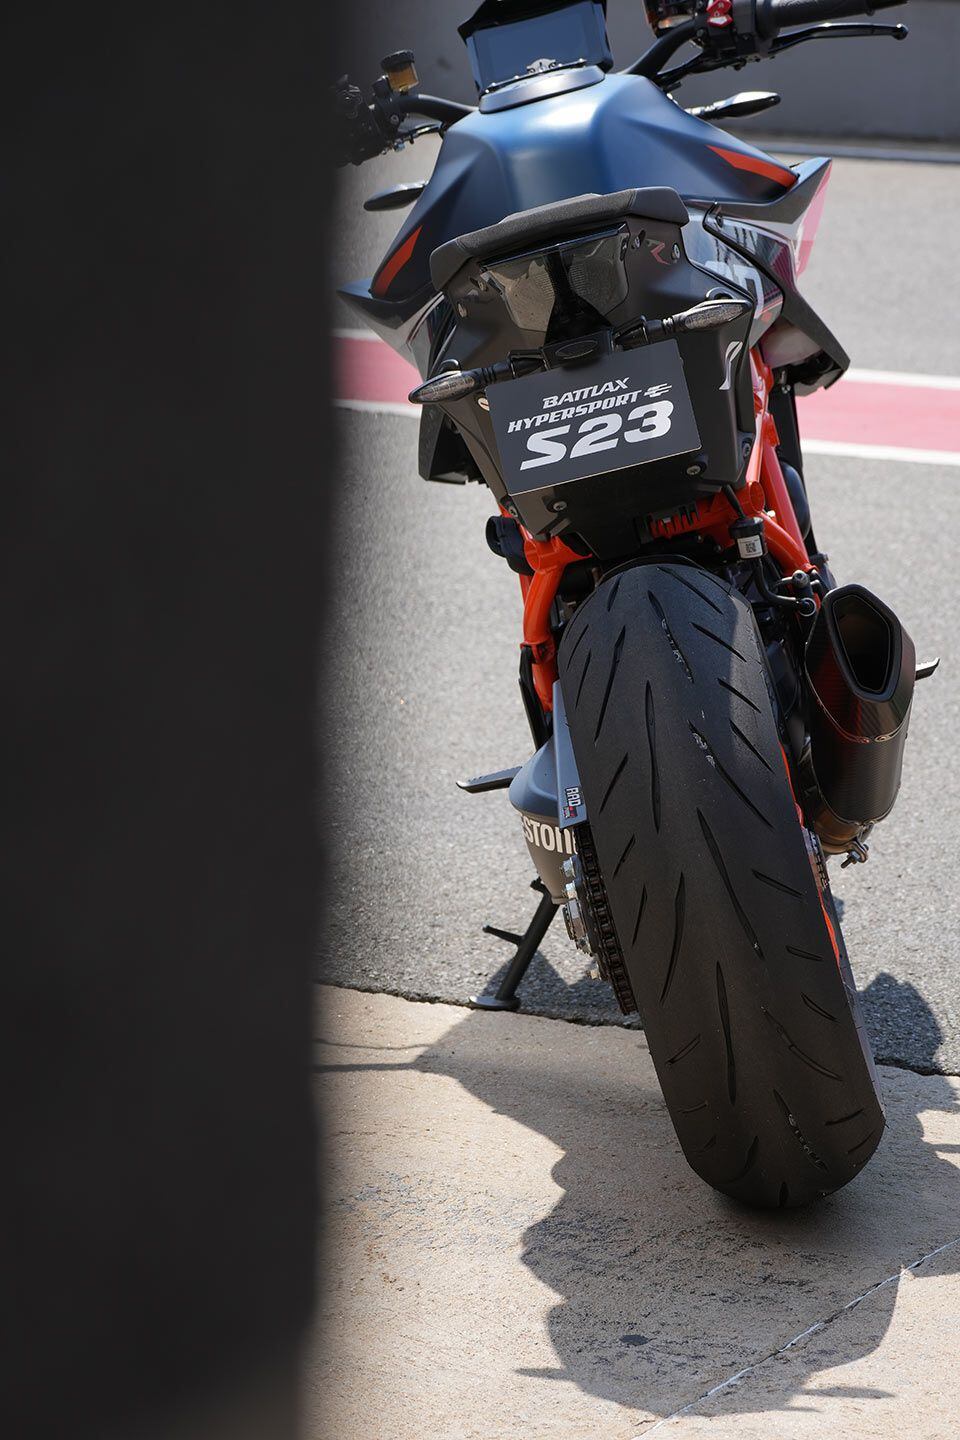 Bridgestone’s Battlax S23 rear tire continues to employ five separate compound zones. The edge compounds have continued to evolve for more cornering grip at high lean angles.